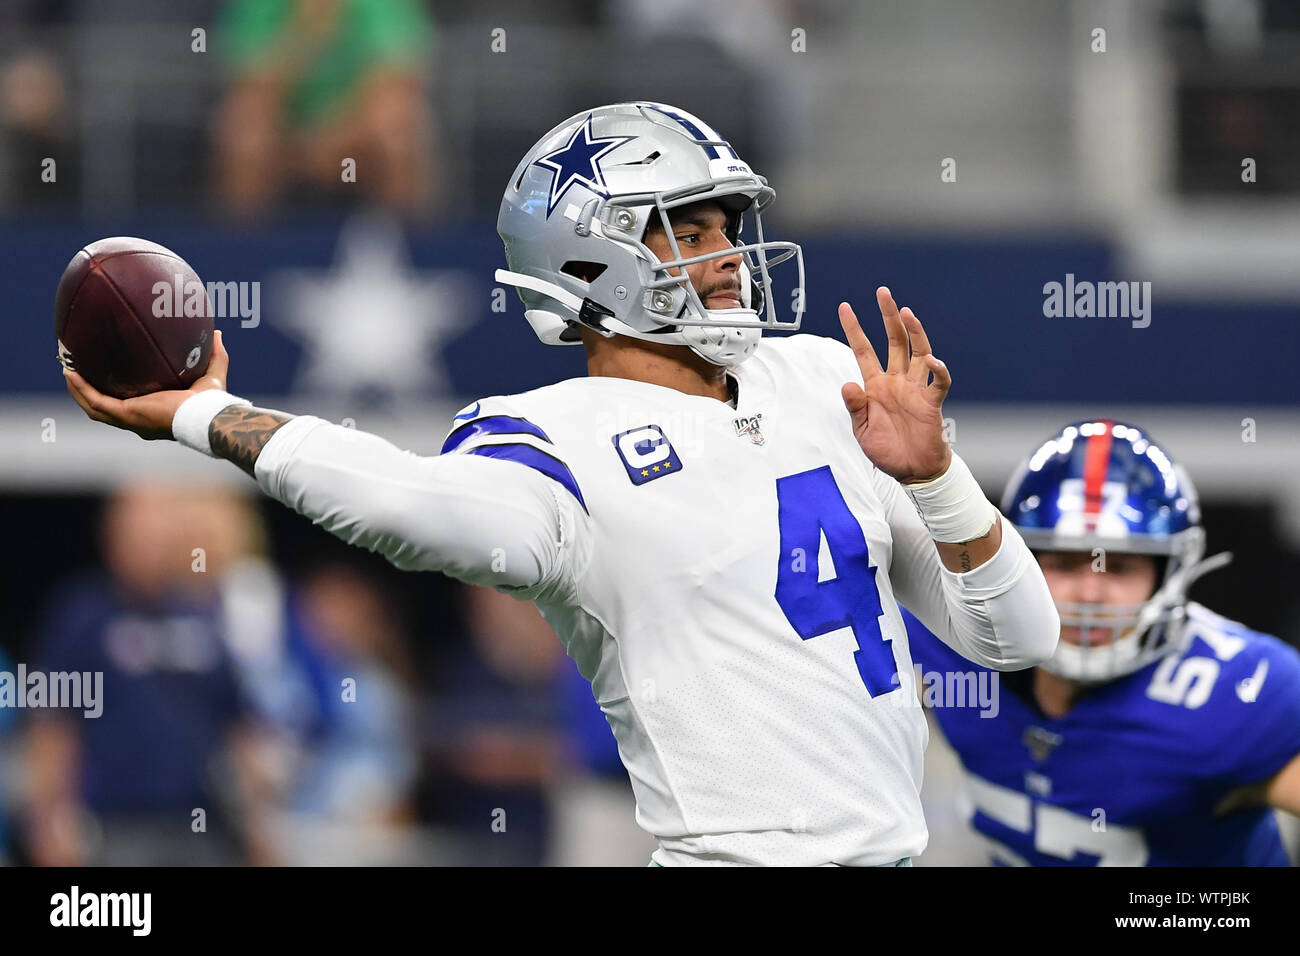 Arlington, Texas, USA. 8th Sep, 2019. Dallas Cowboys quarterback Dak Prescott (4) throws a touchdown pass to Dallas Cowboys wide receiver Randall Cobb (18) during the second half of the NFL football game between the New York Giants and the Dallas Cowboys at AT&T Stadium in Arlington, Texas. Shane Roper/Cal Sport Media/Alamy Live News Stock Photo